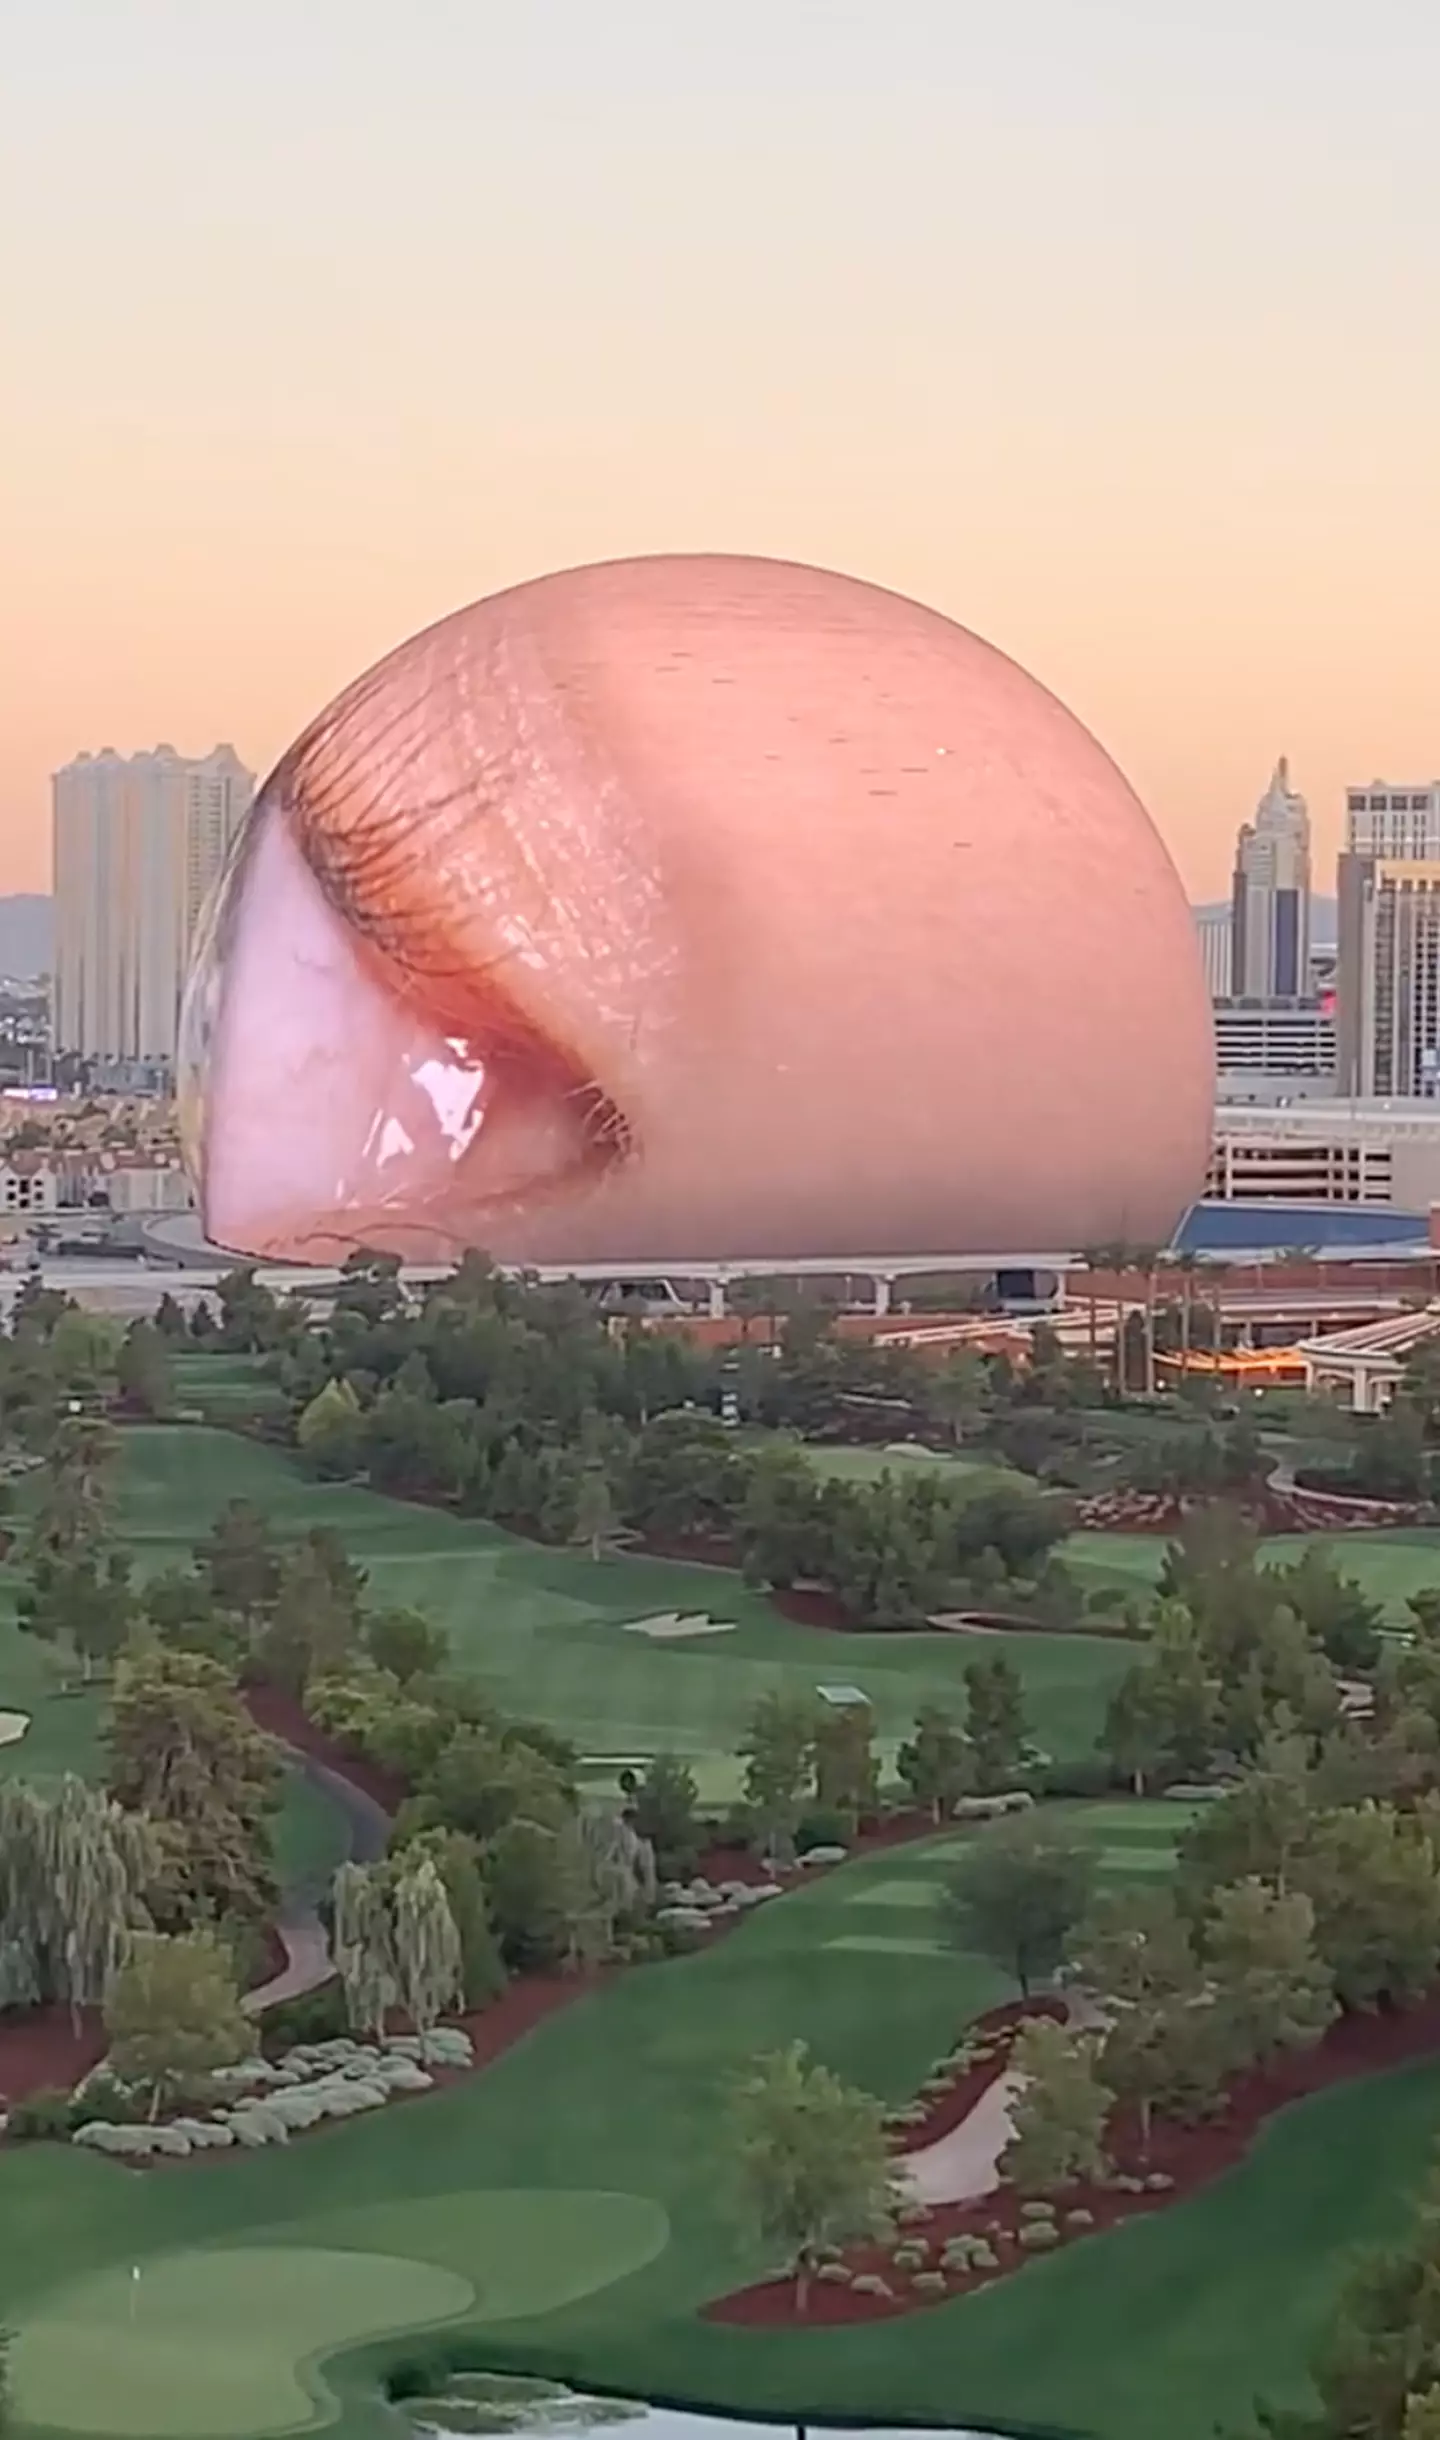 People have been left feeling creeped out by the giant eye.